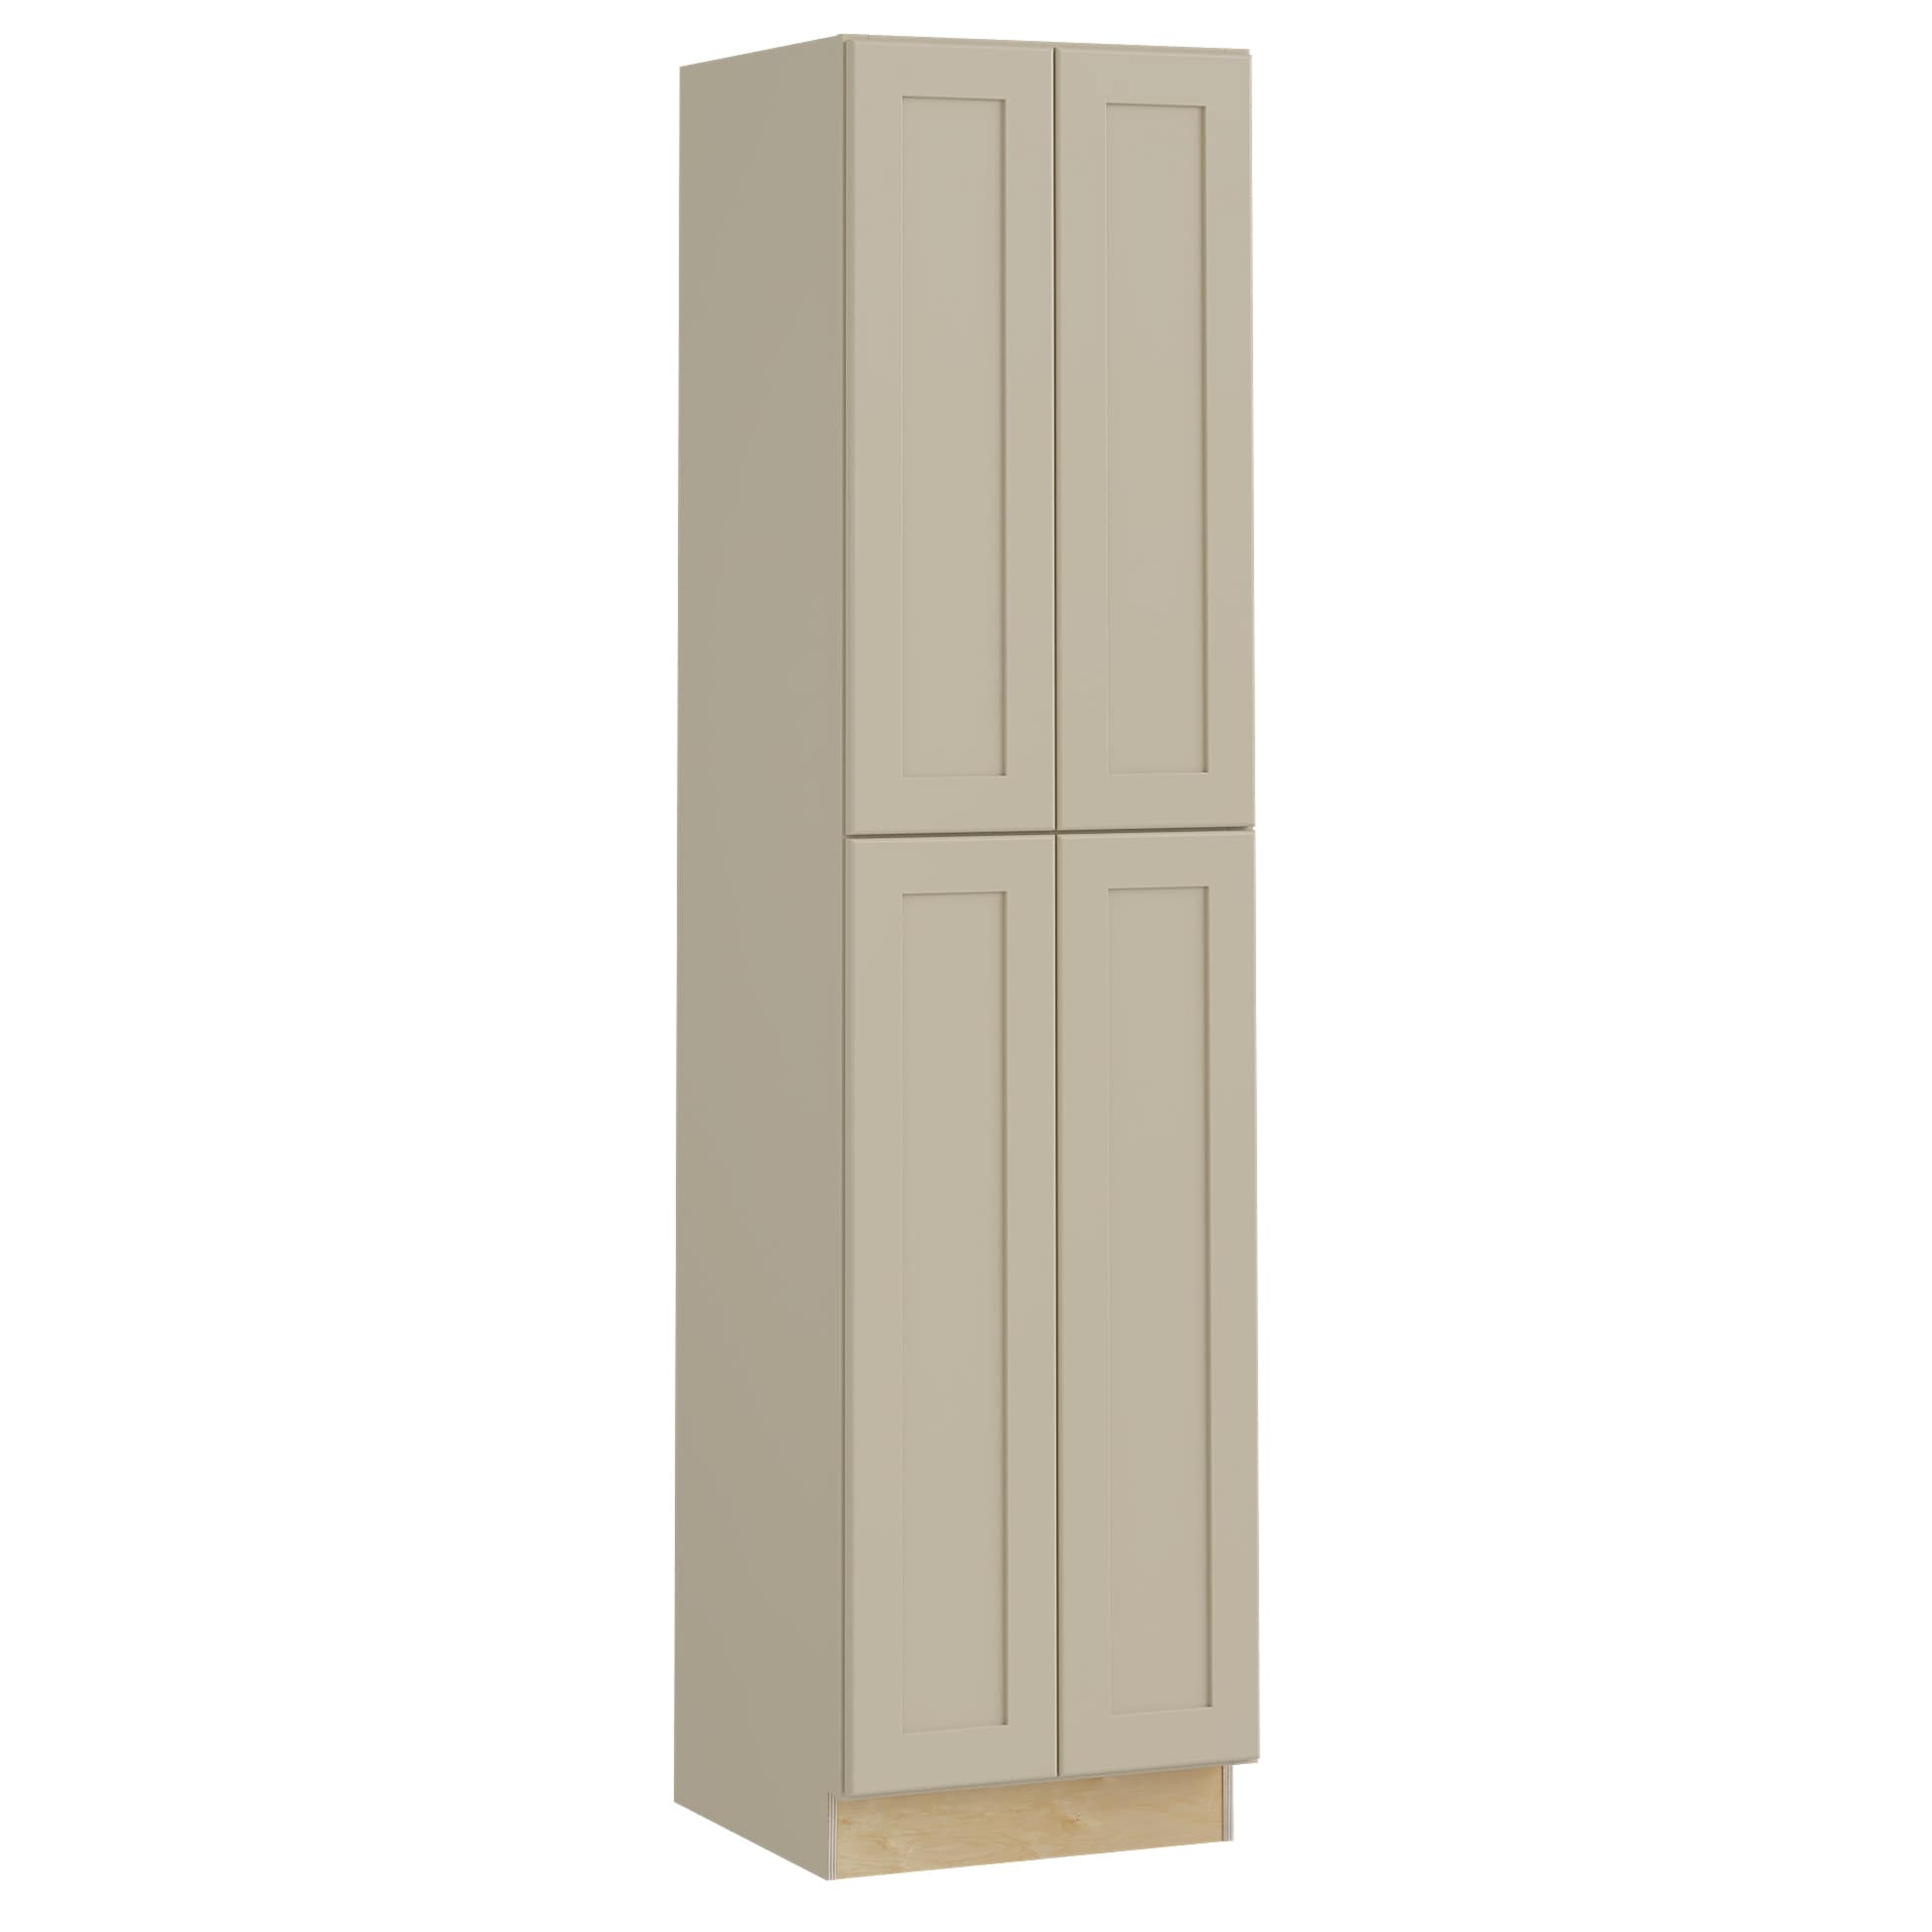 Luxxe Cabinetry 24-in W x 96-in H x 24-in D Norfolk Blended Cream Painted Door Pantry Fully Assembled Semi-custom Cabinet in Off-White | U242496-NBC